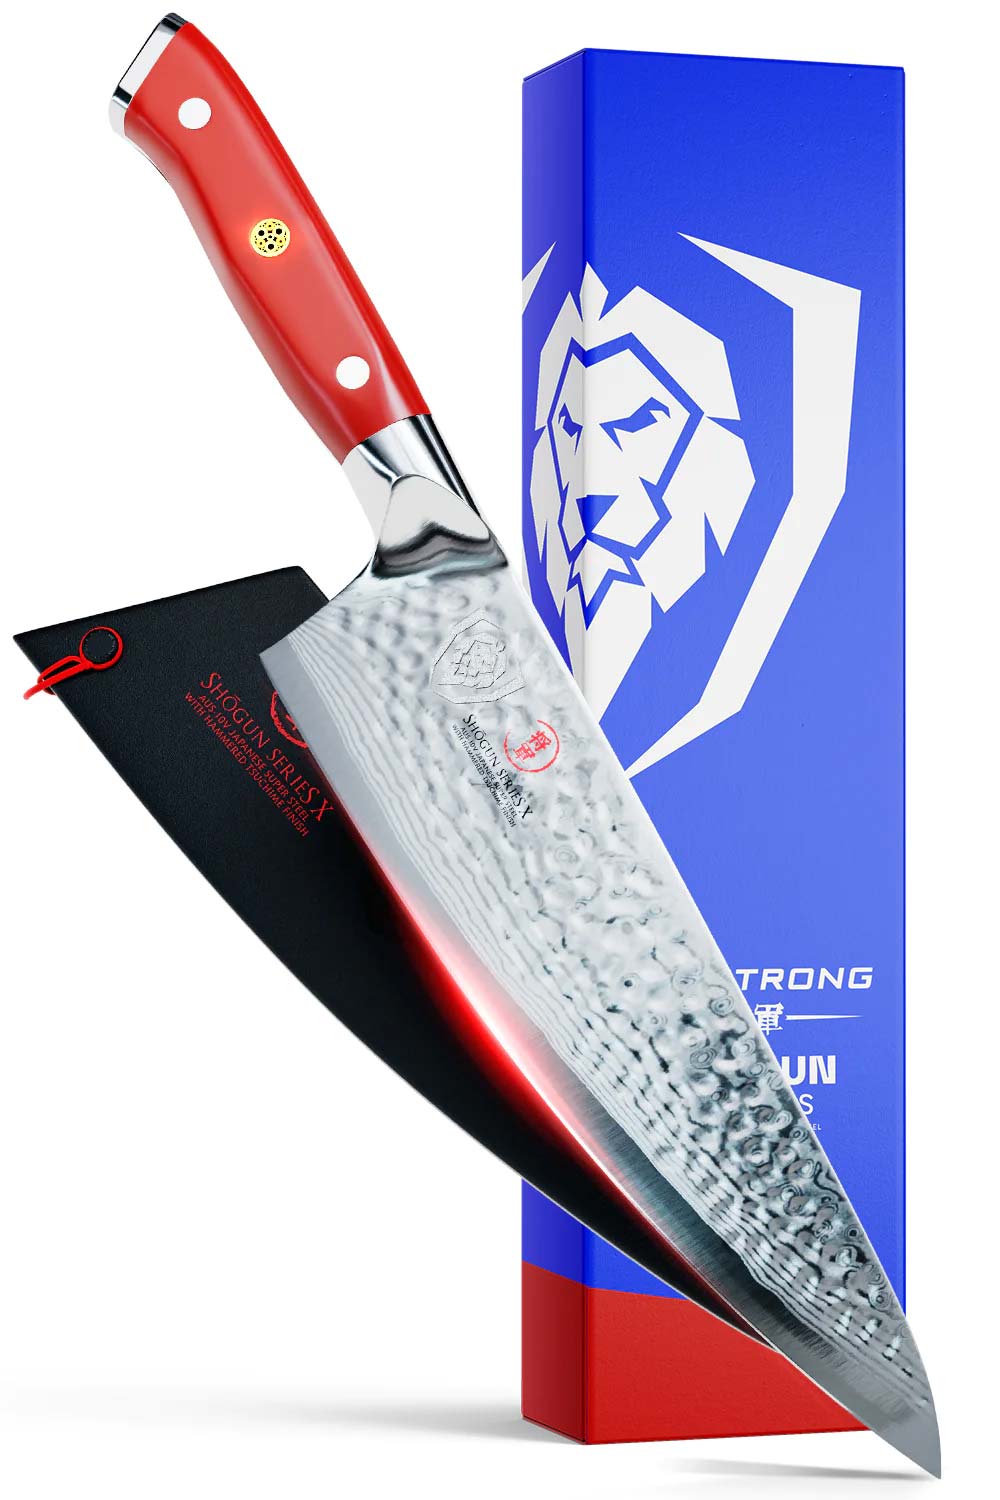 Dalstrong shogun series 8 inch chef knife with red handle in front of it's premium packaging.